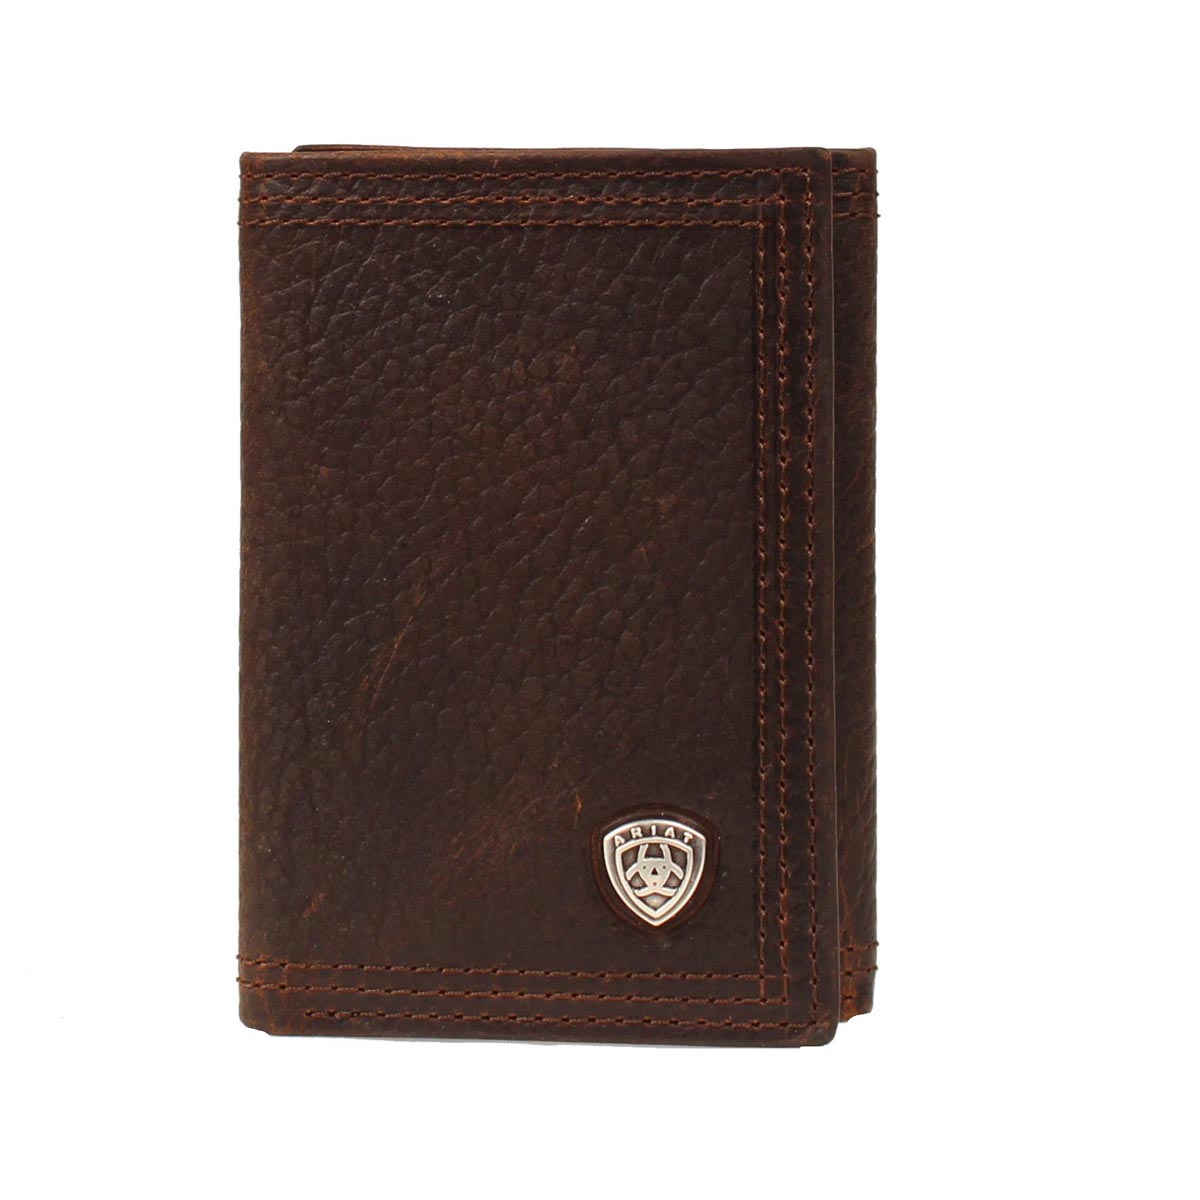 Ariat Trifold Wallet Oil tanned dark copper leather and Ariat brand concho. Inside features a clear ID slot, 6 credit card slots, 2 underneath slots, and money slots. Folded dimensions are approx. 3" by 4"